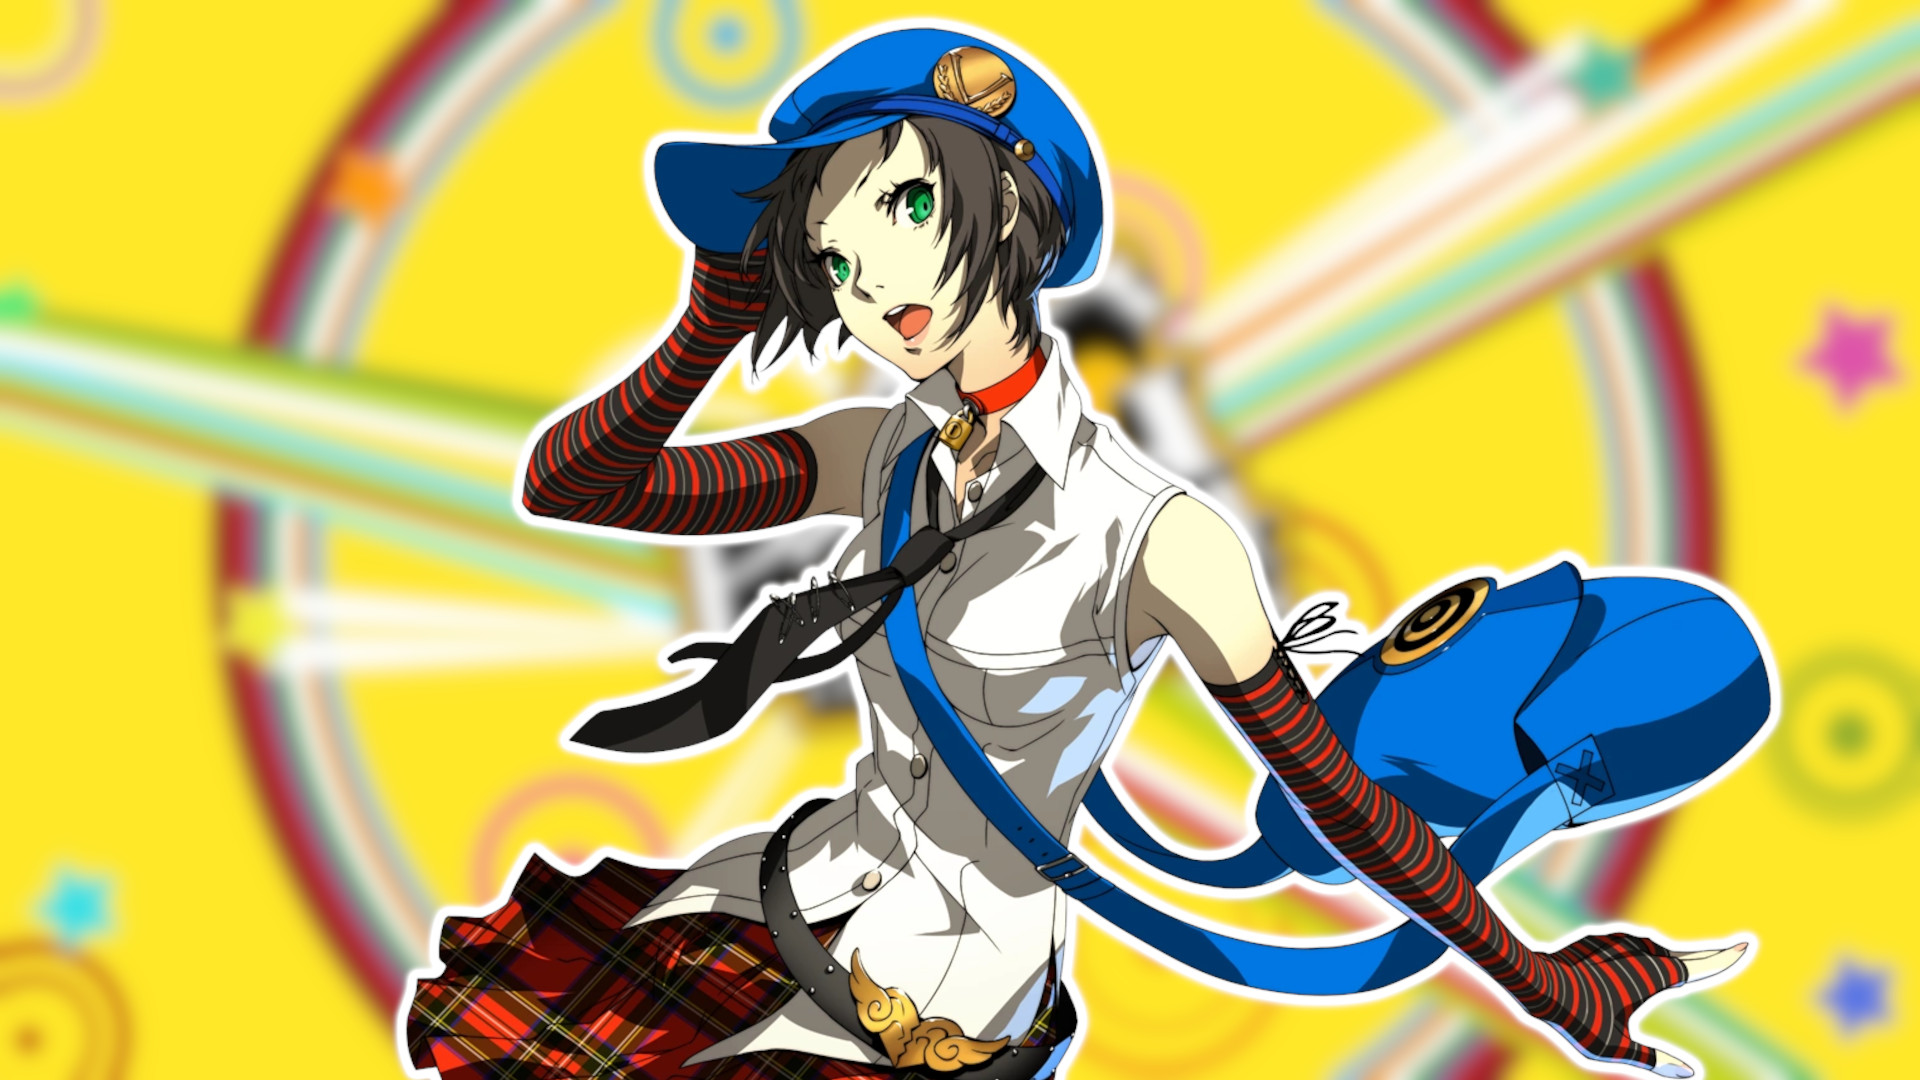 Persona 4: Marie - wide 1